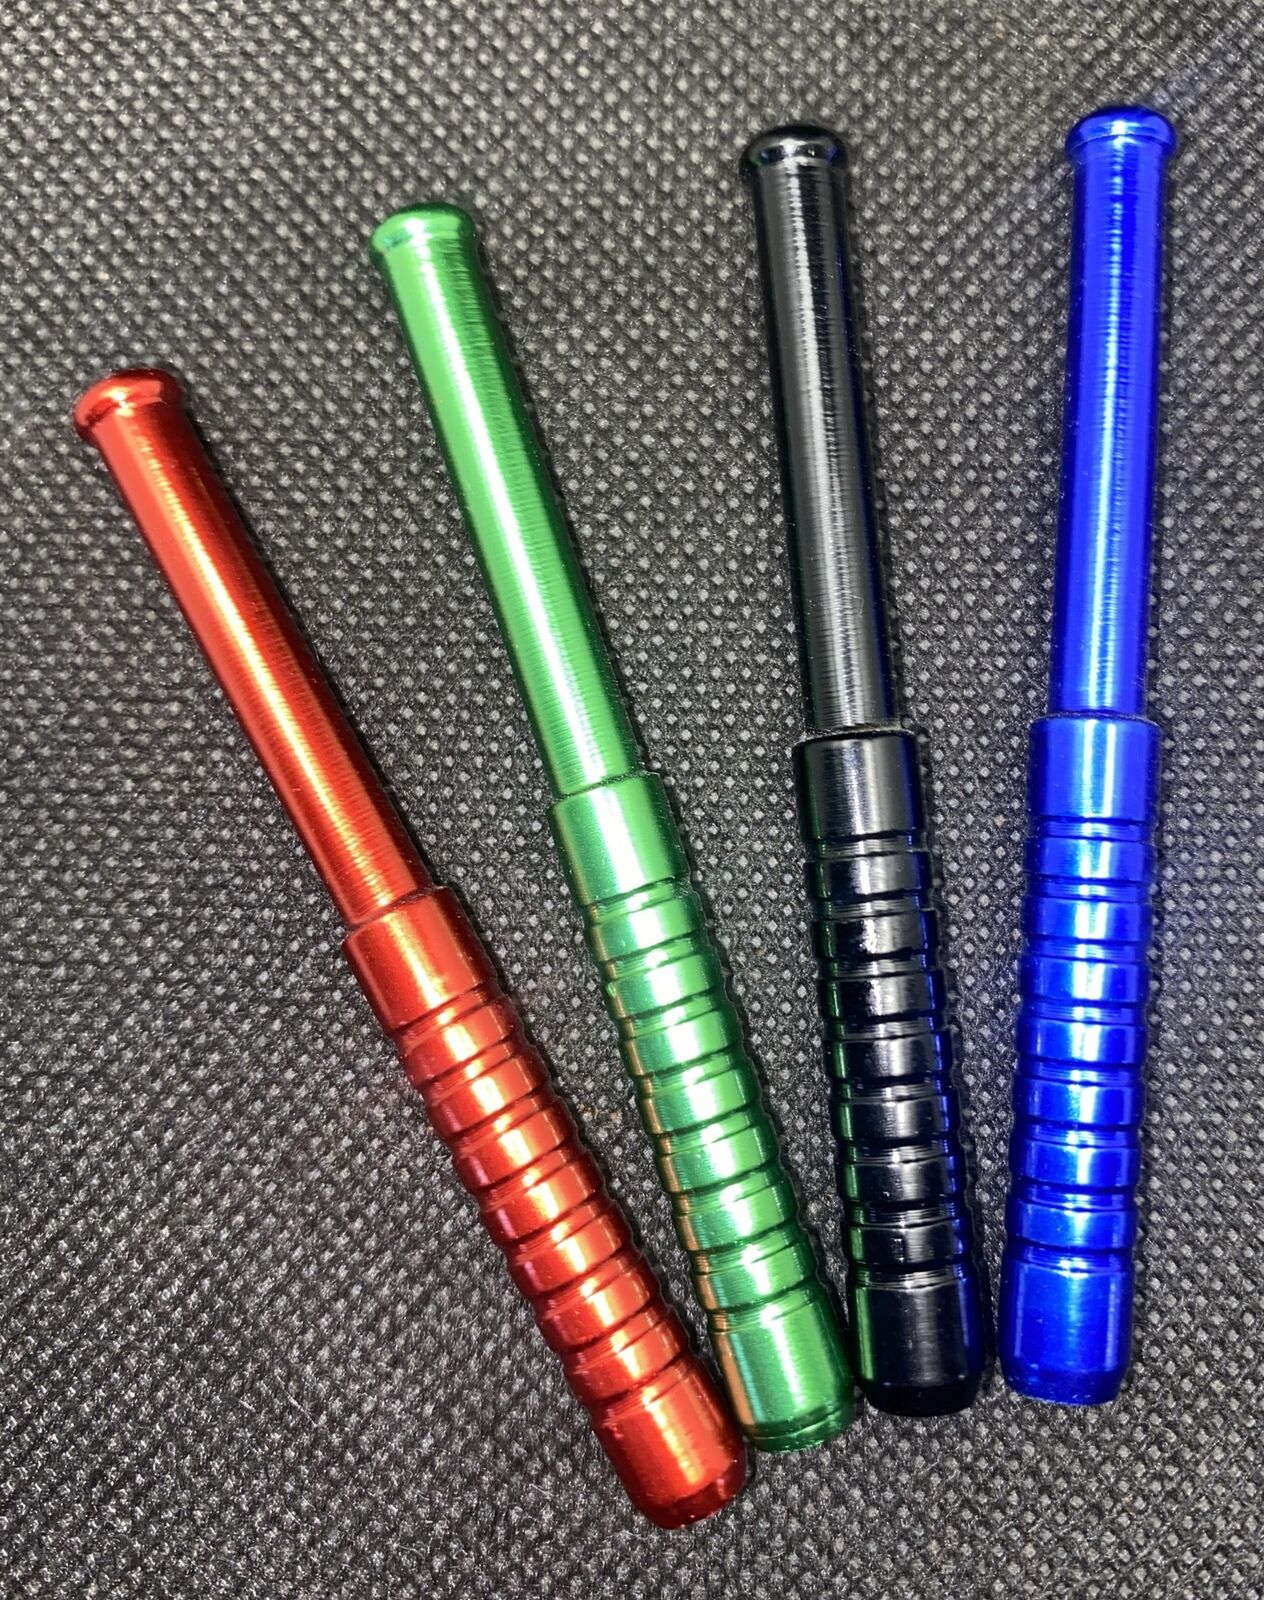 LOT OF 4 SOLID ANODIZED ALUMINUM ONE HITTER PIPE DUGOUT BAT 3 INCH SALE PRICED